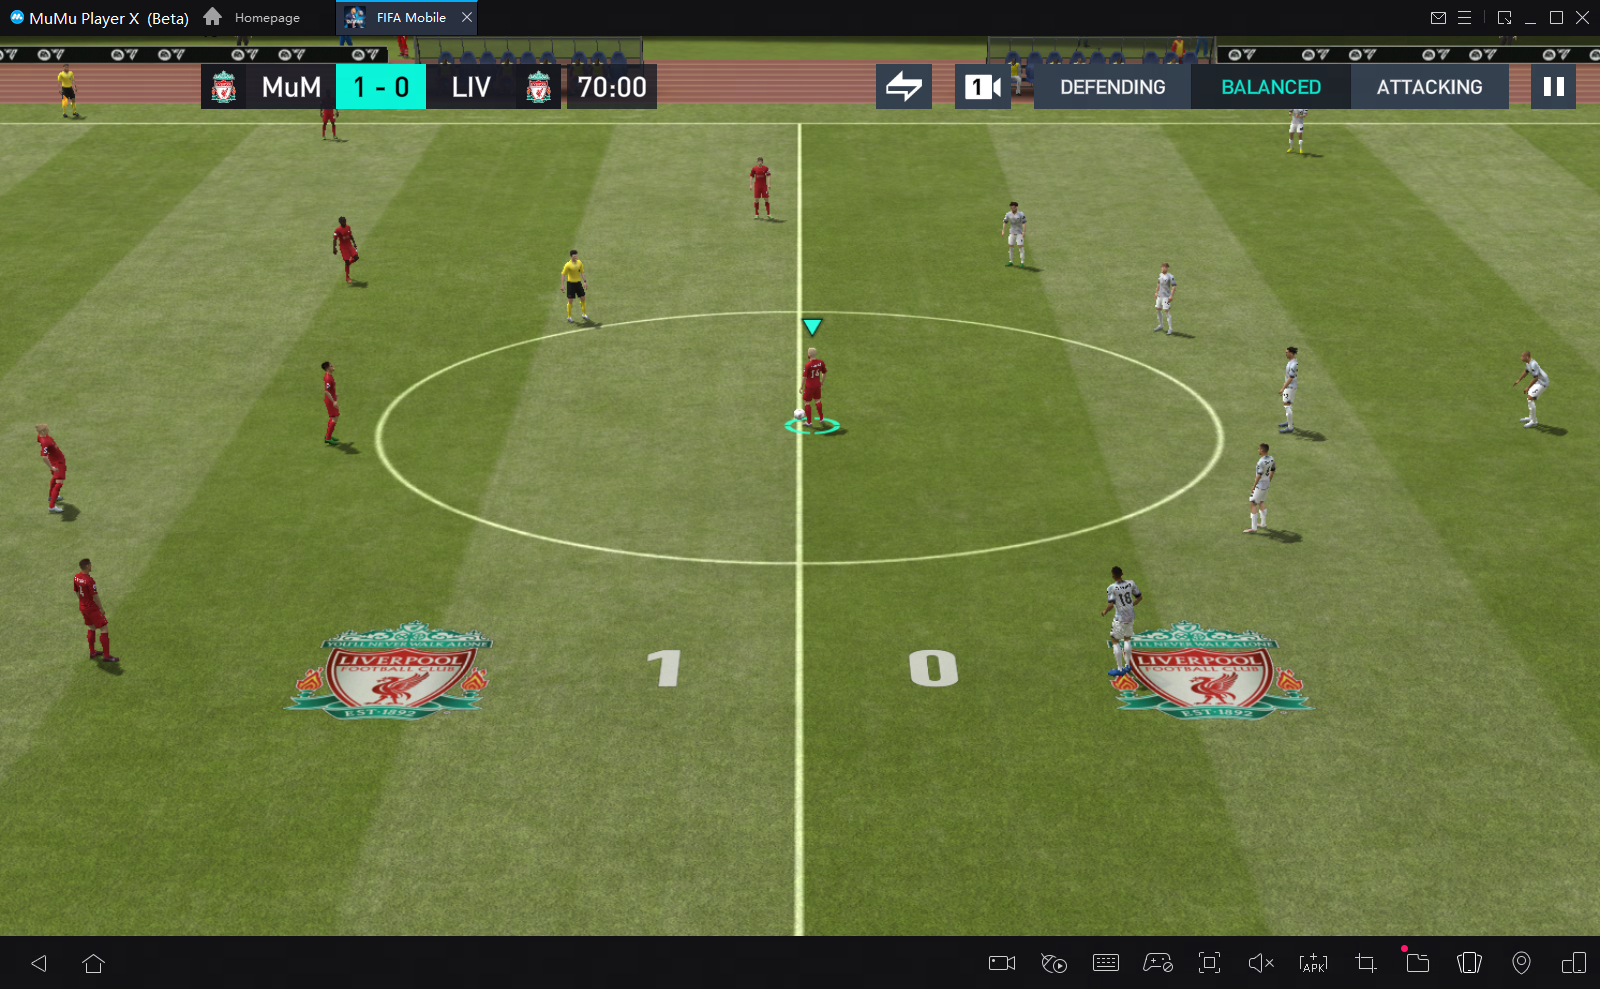 Download and play FIFA Mobile: FIFA World Cup™ on PC with MuMu Player